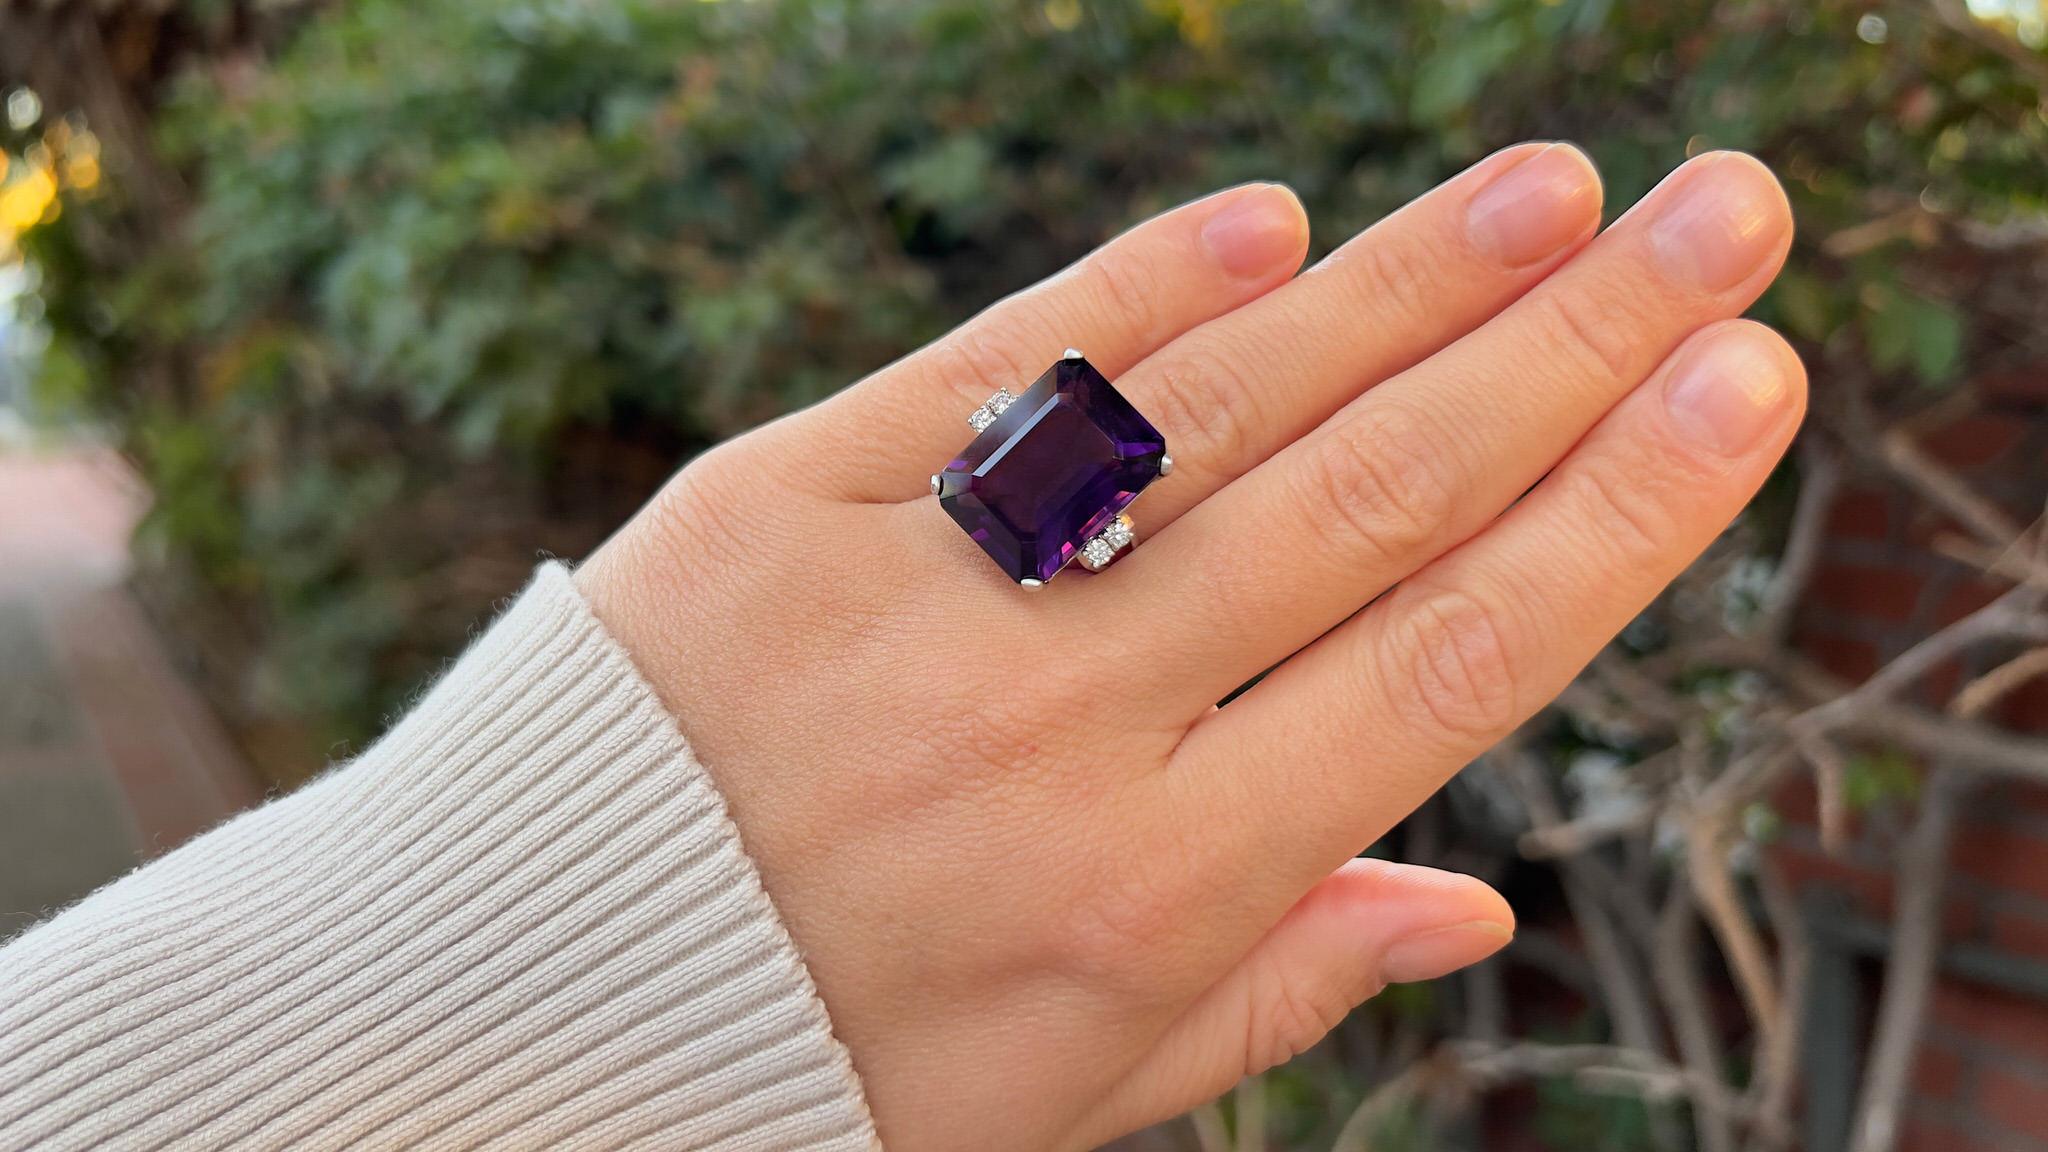 Emerald Cut Amethyst Ring With Diamonds 30.20 Carats 14K White Gold For Sale